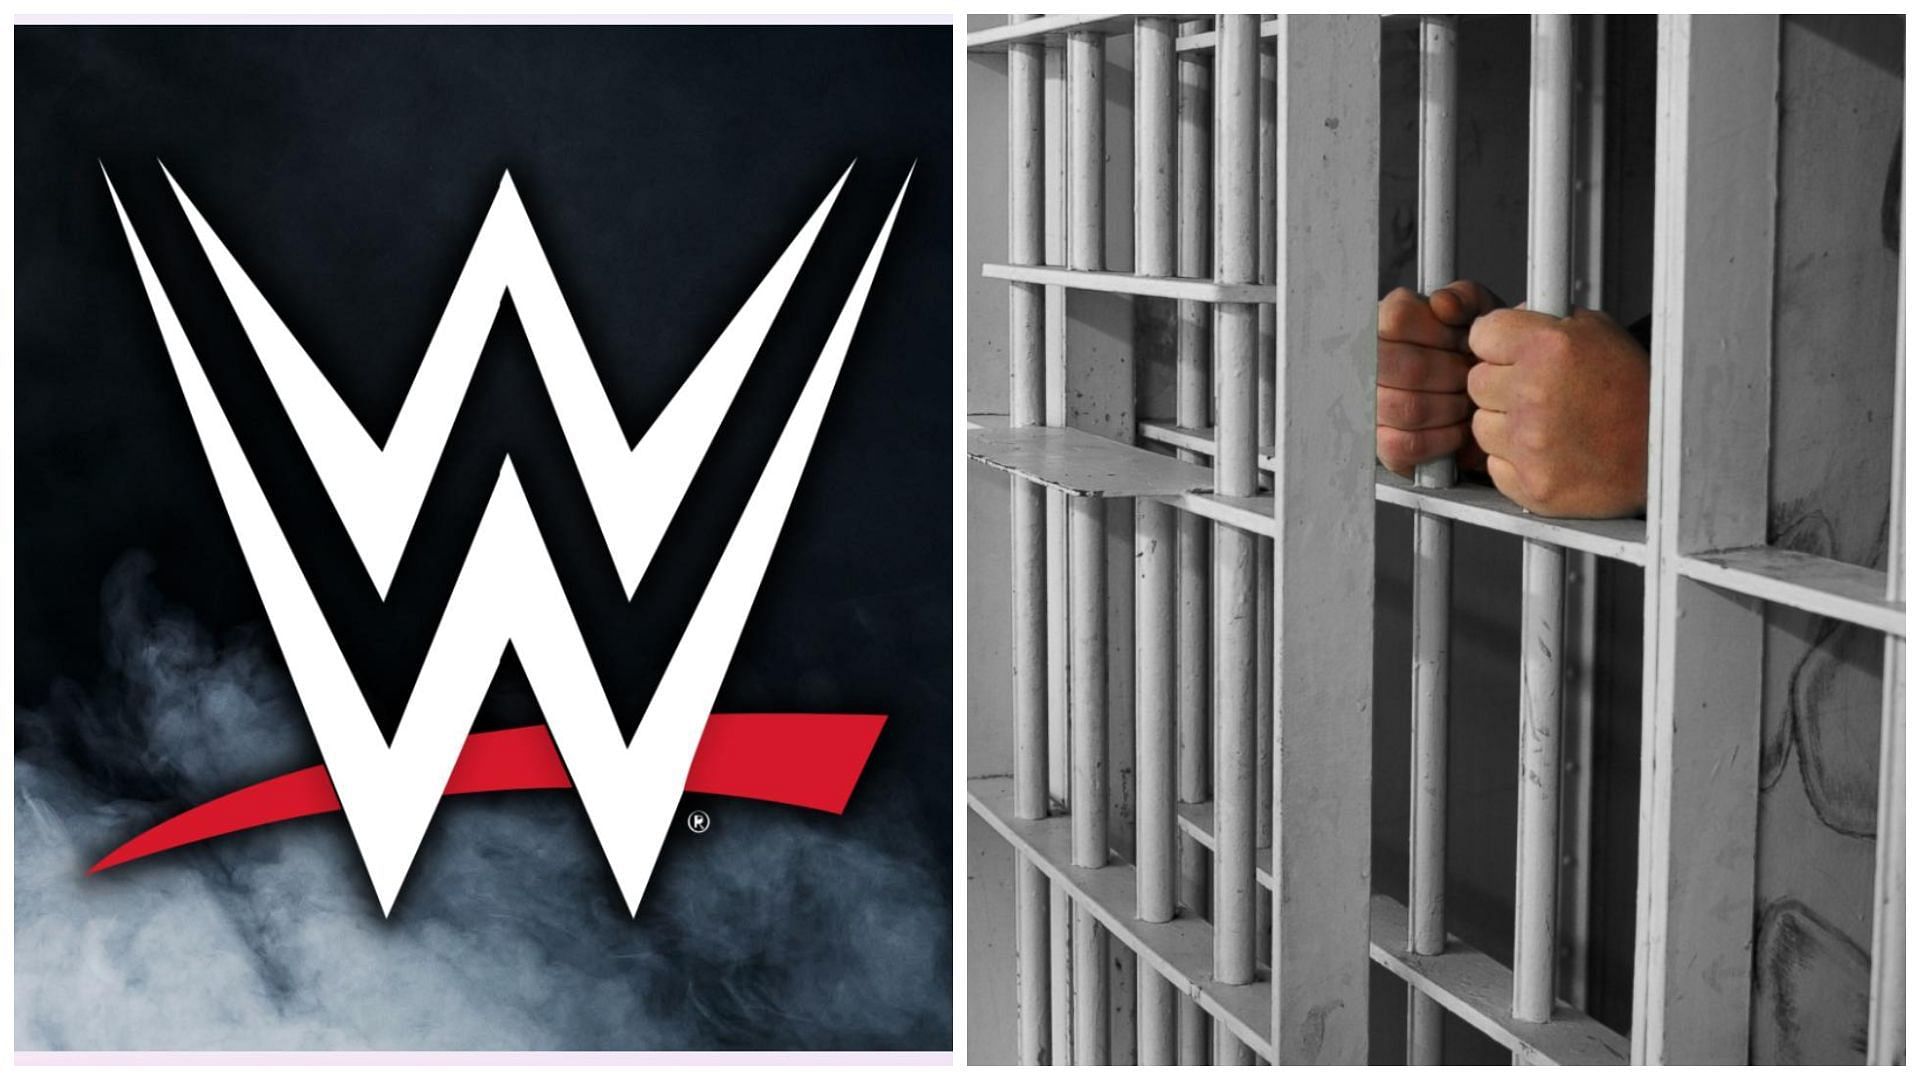 A former WWE wrestler will soon be behind bars.